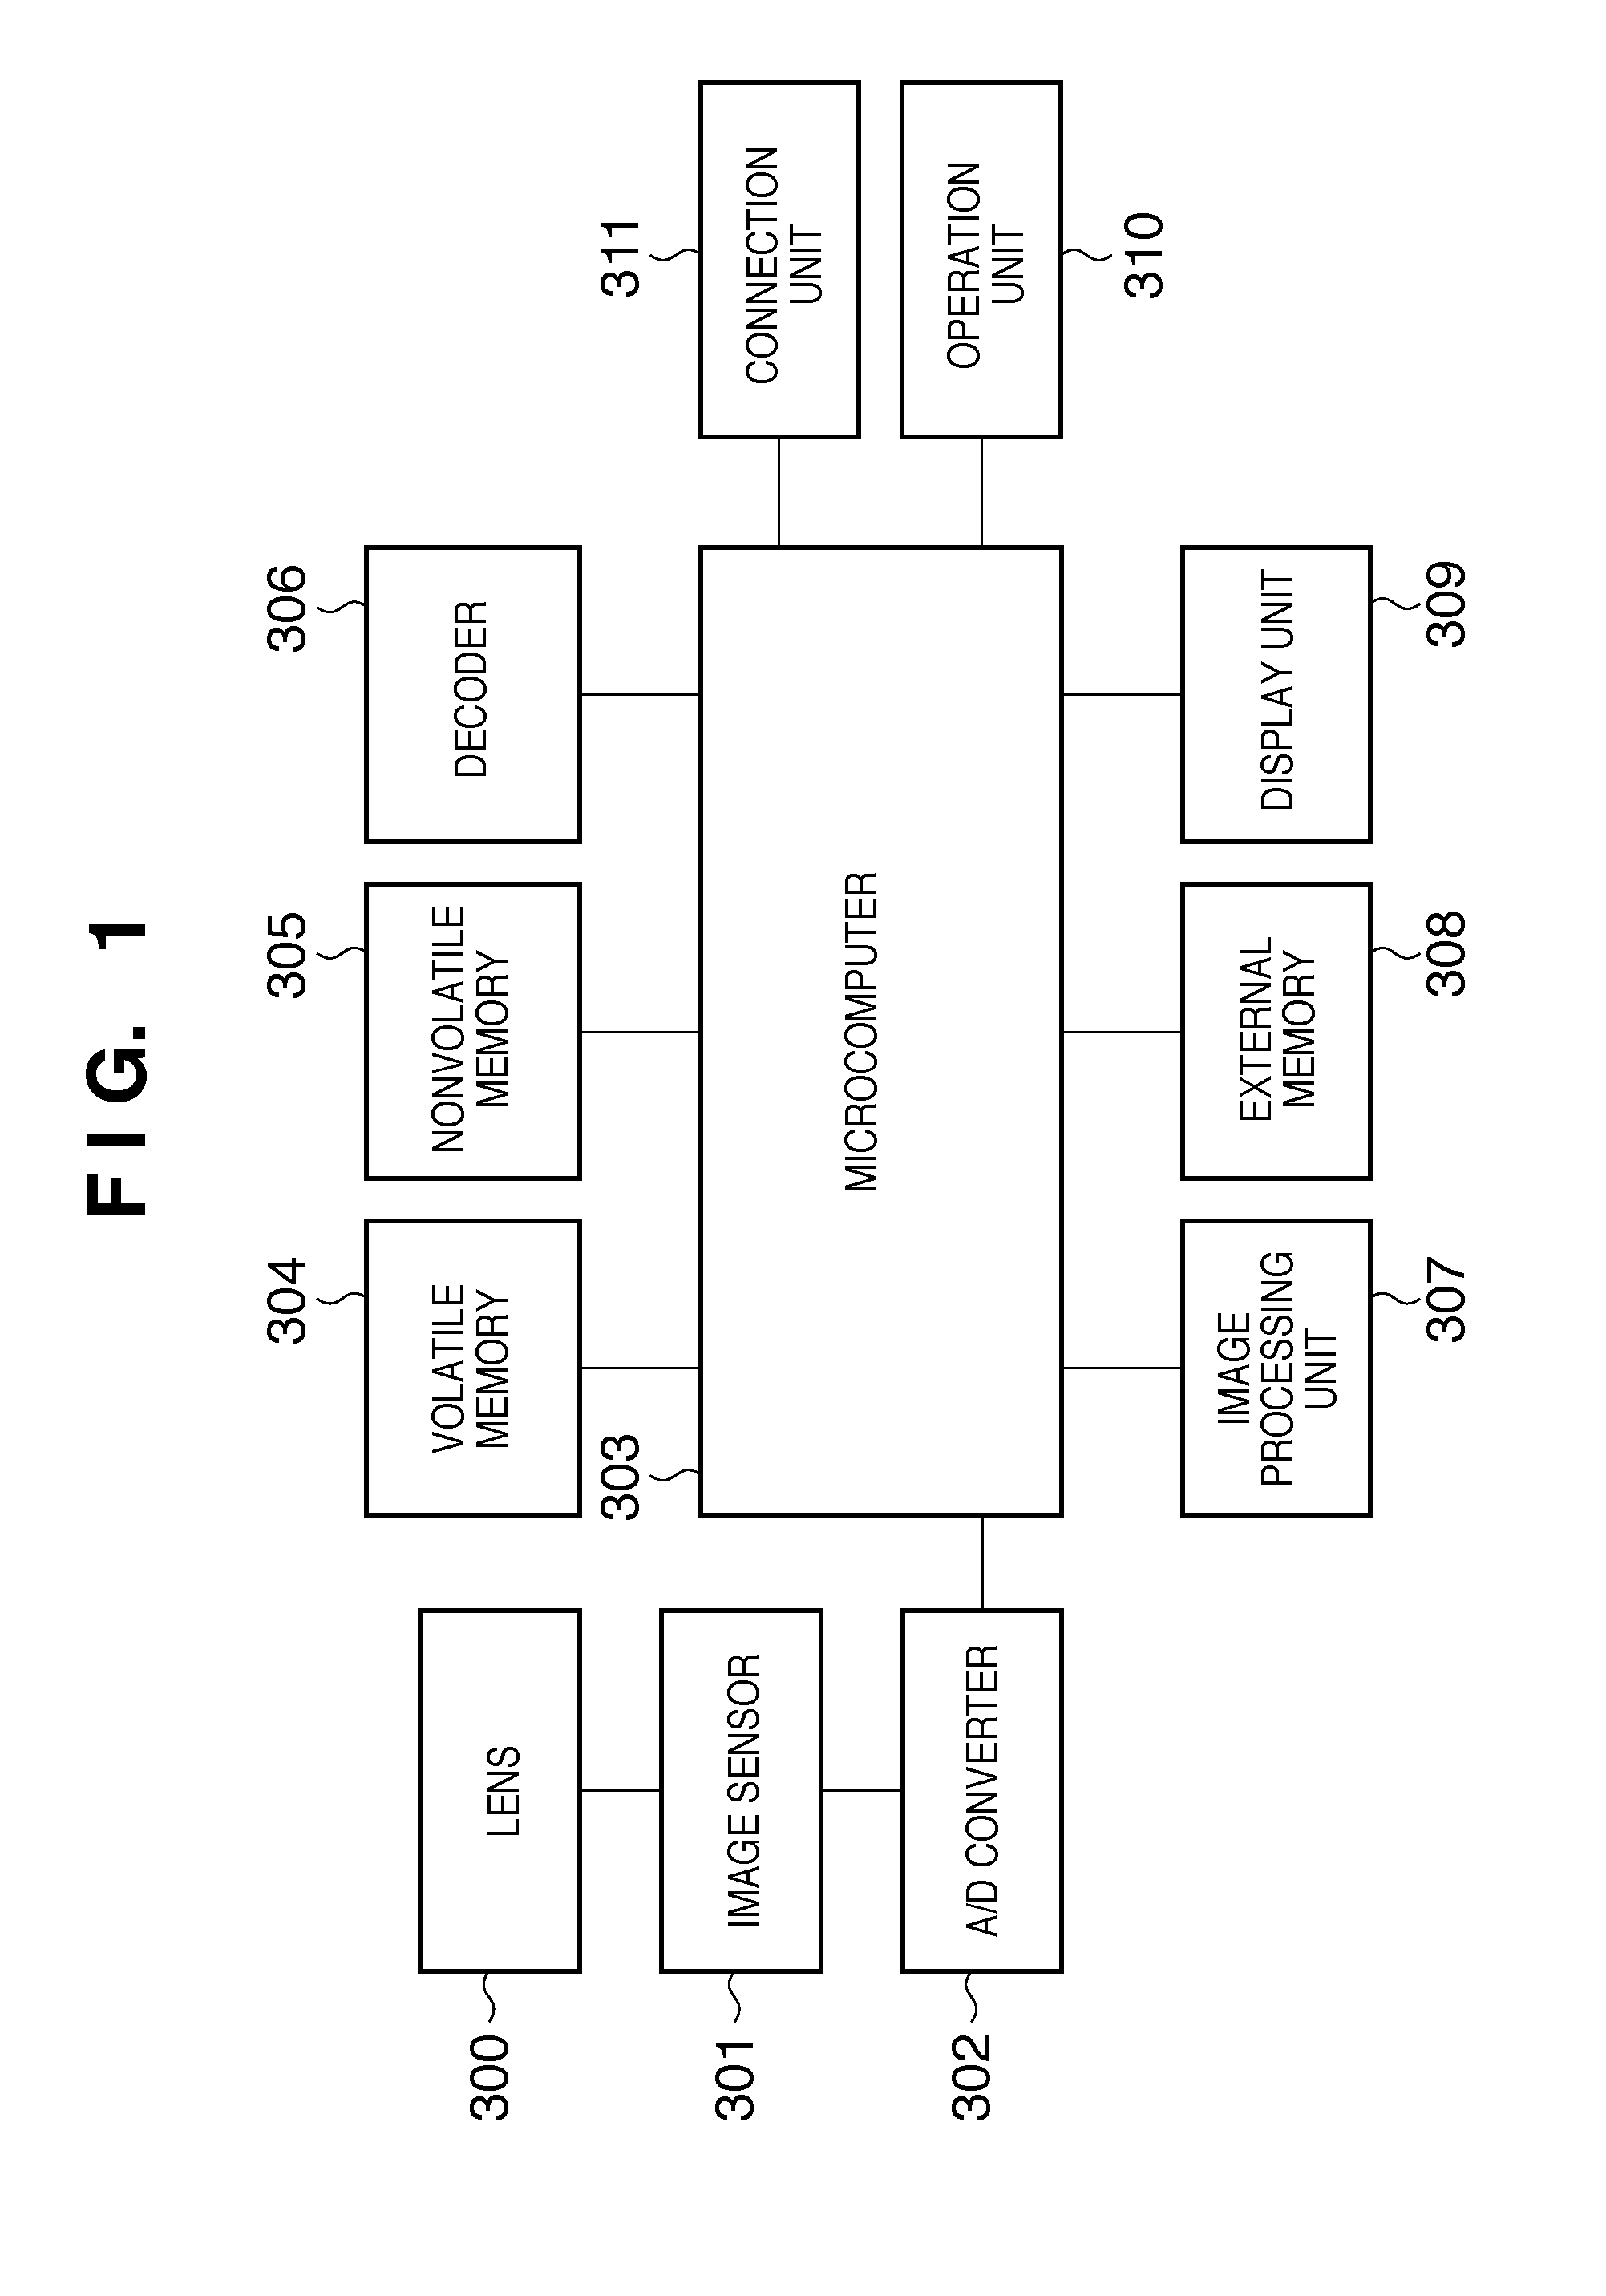 Image sensing apparatus and control method thereof